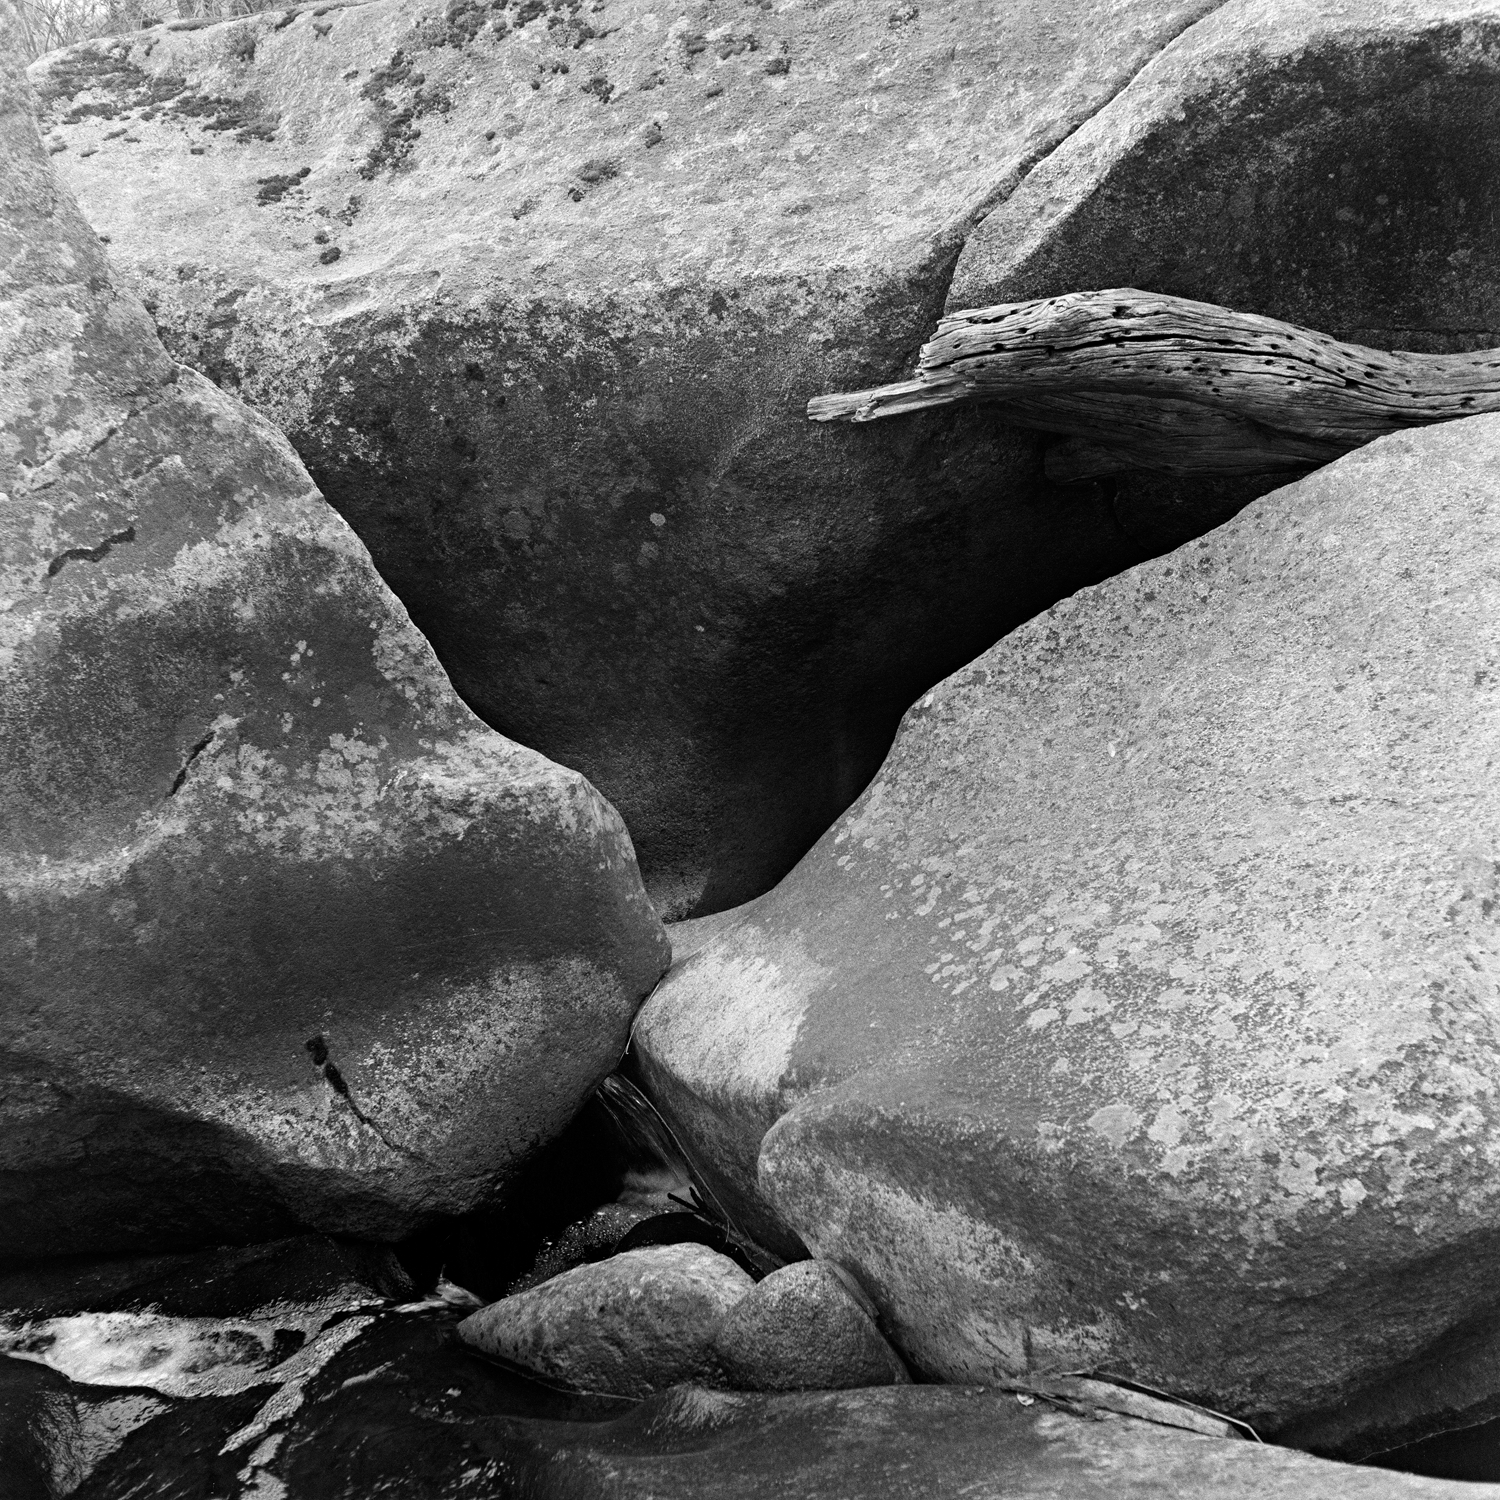 Black and white photograph depicting smooth boulders in stream.